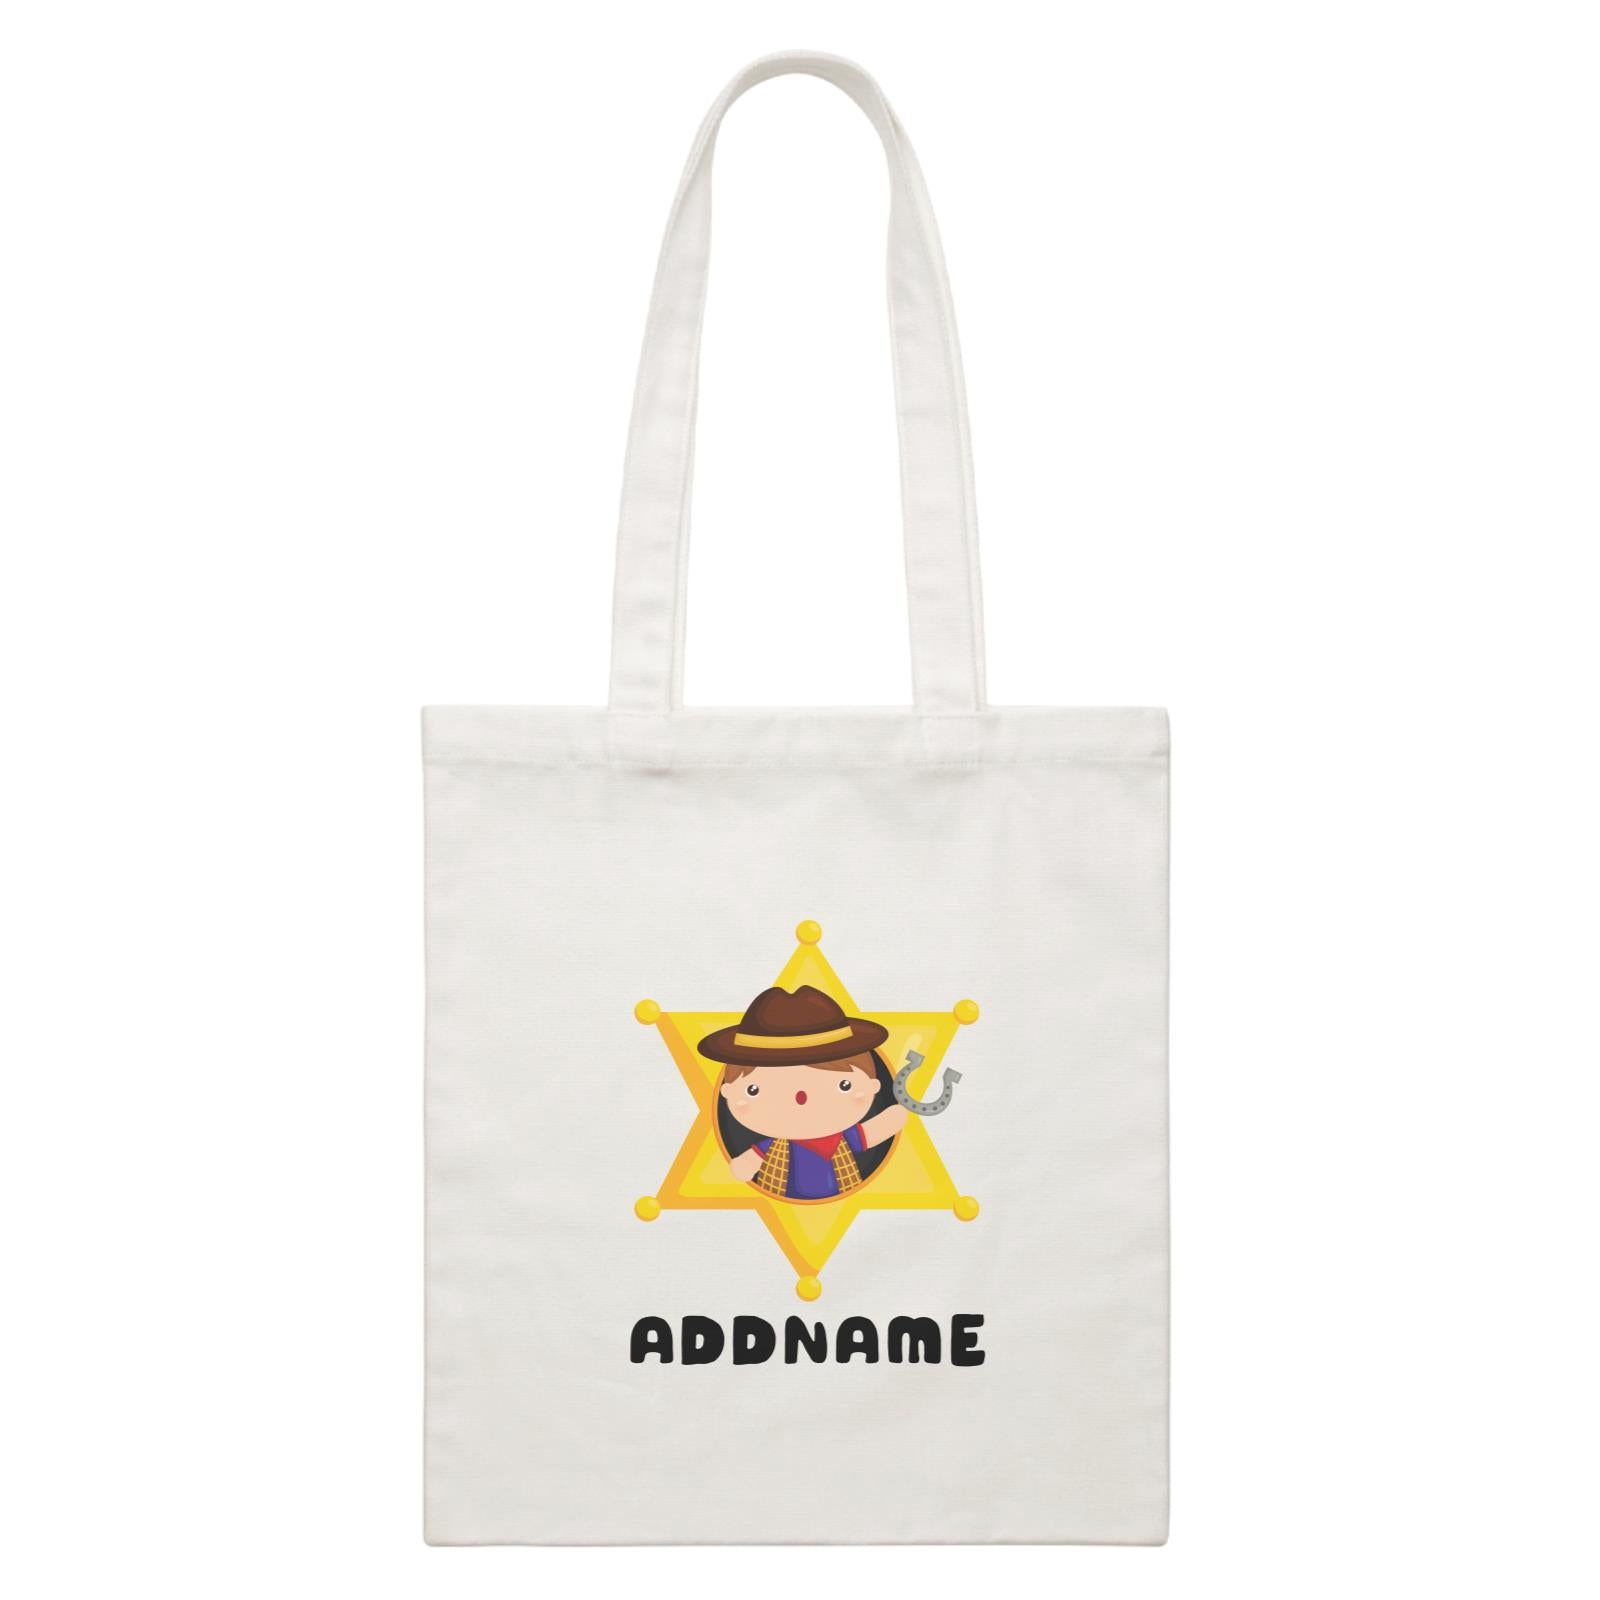 Birthday Cowboy Style Little Cowboy Holding Hoe In Star Badge Addname White Canvas Bag